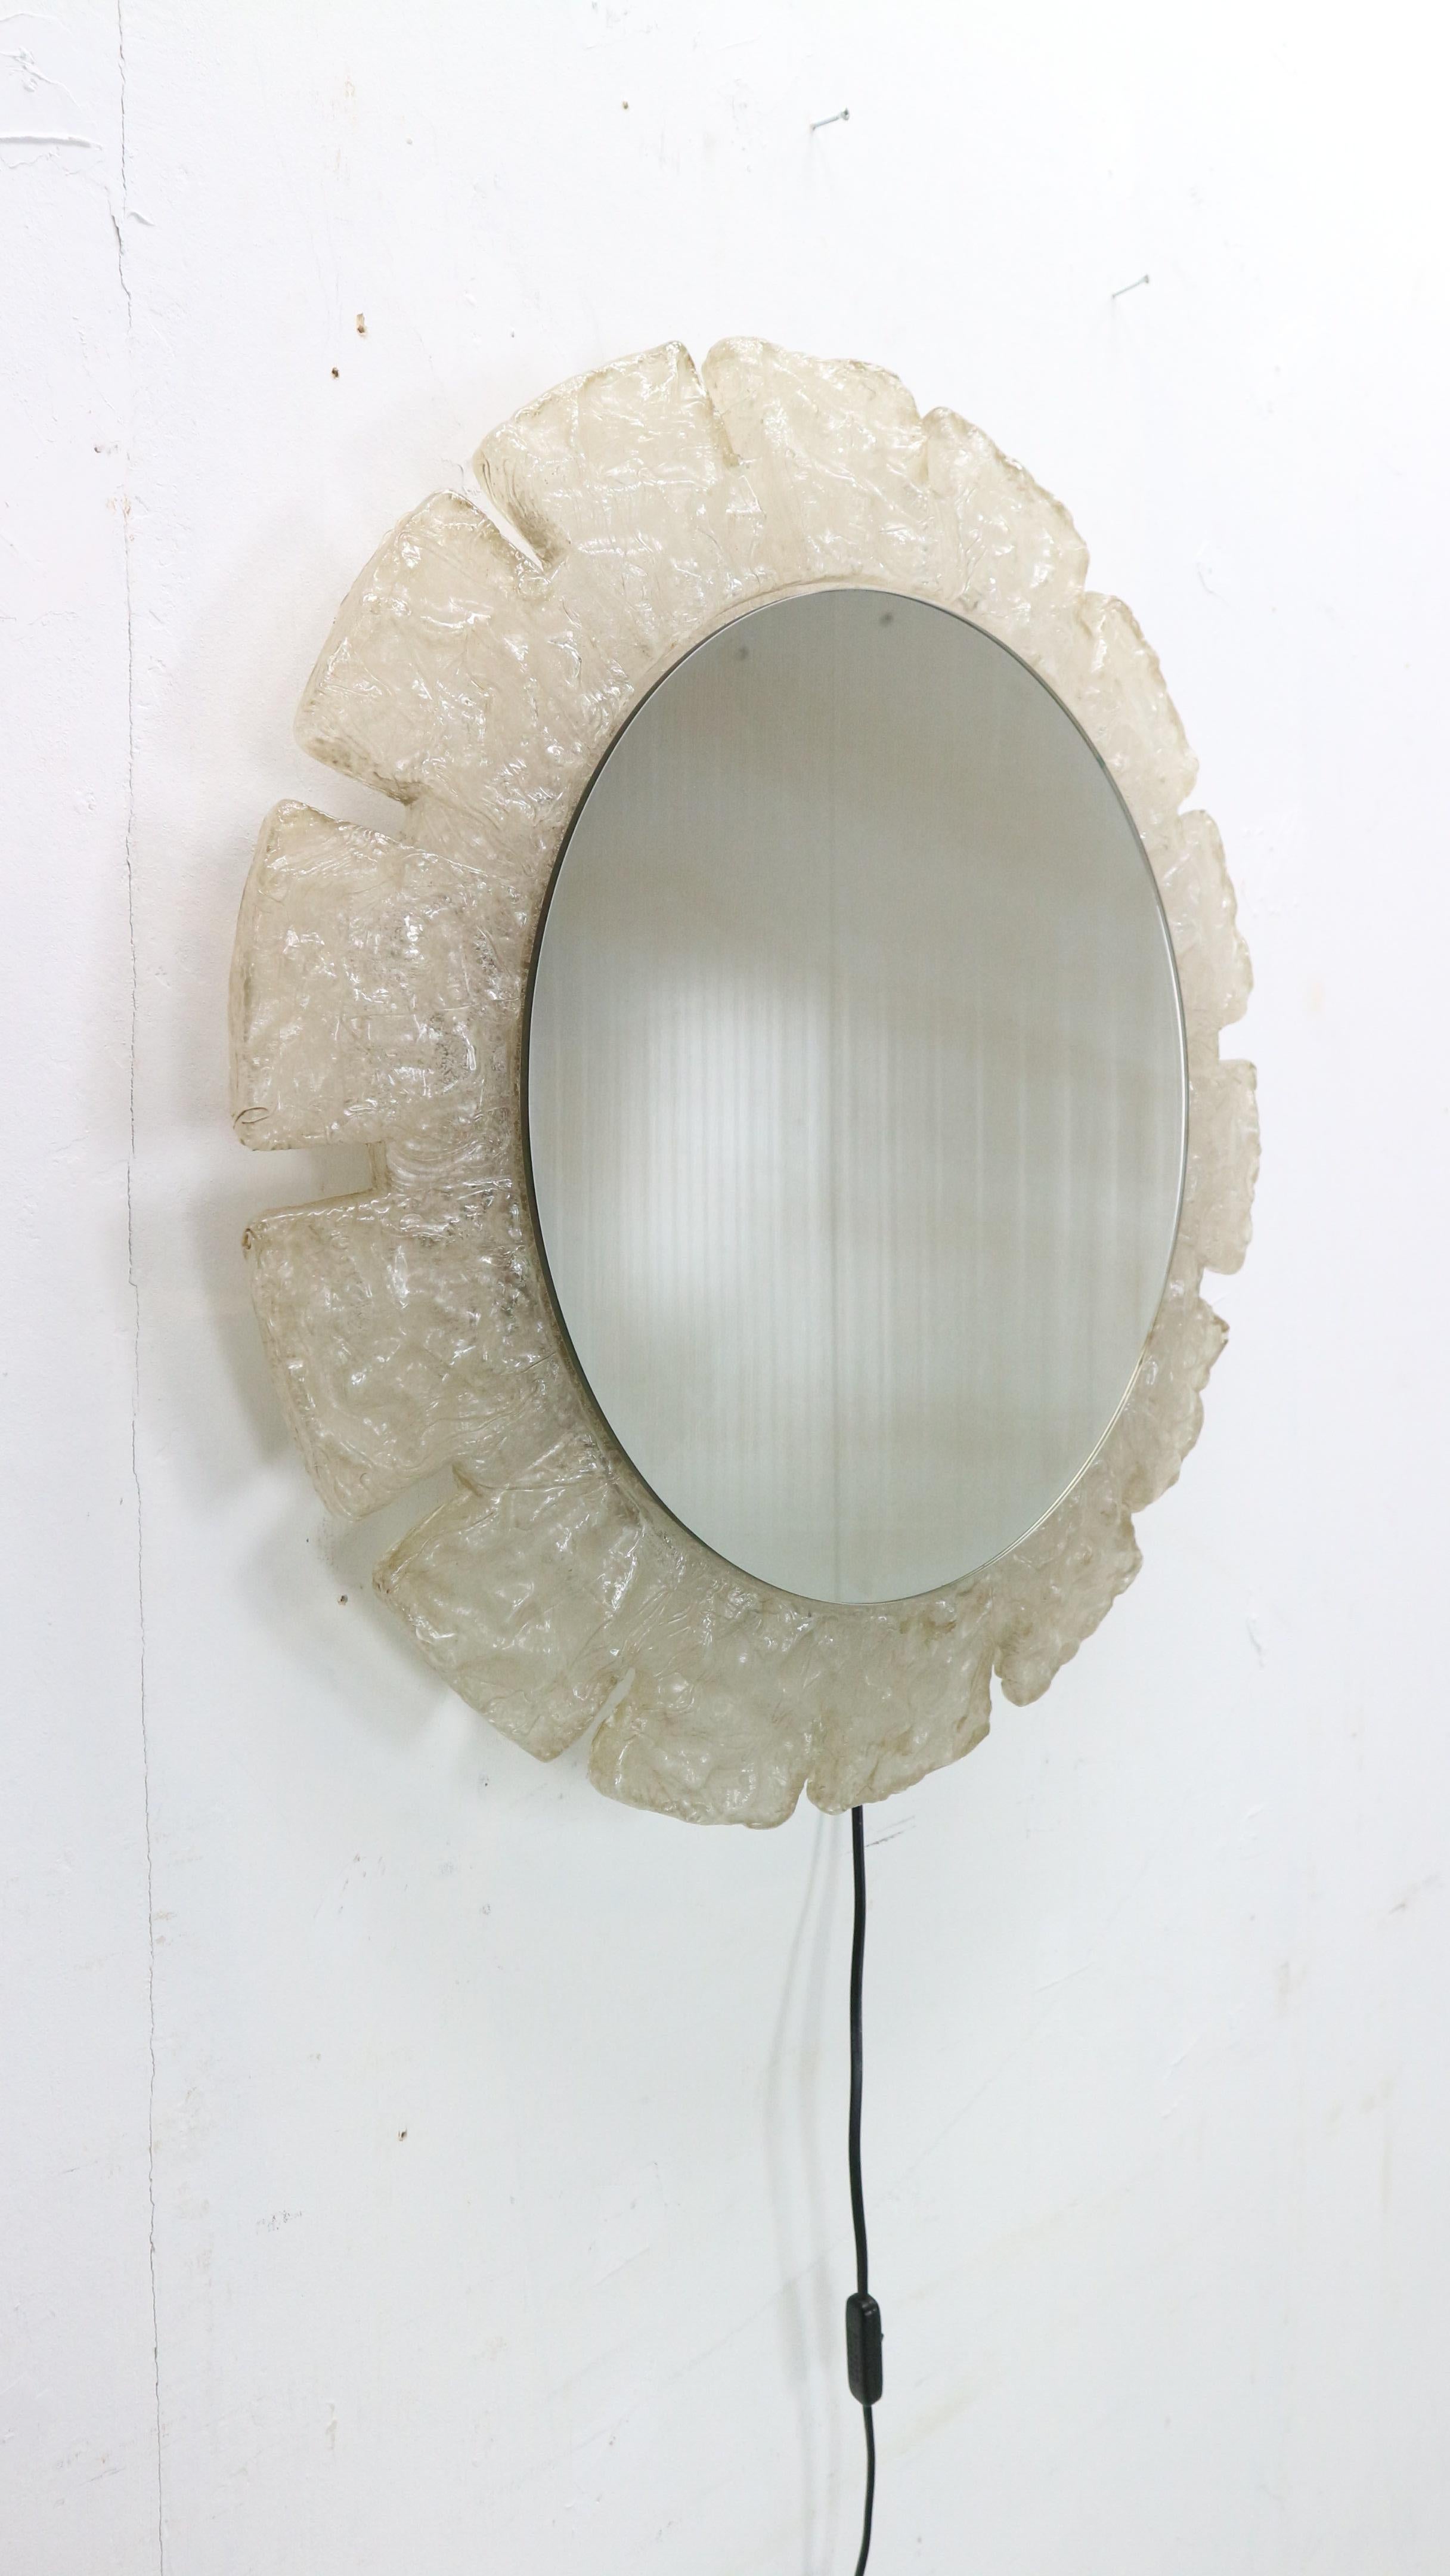 The round mirror designed by Egon Hillebrand, 1960's period Germany.
It is made of metal with plexiglass around the mirror itself. Three interior lightings which emits a warm soft light when it is on. 
The mirror is in very good condition. The